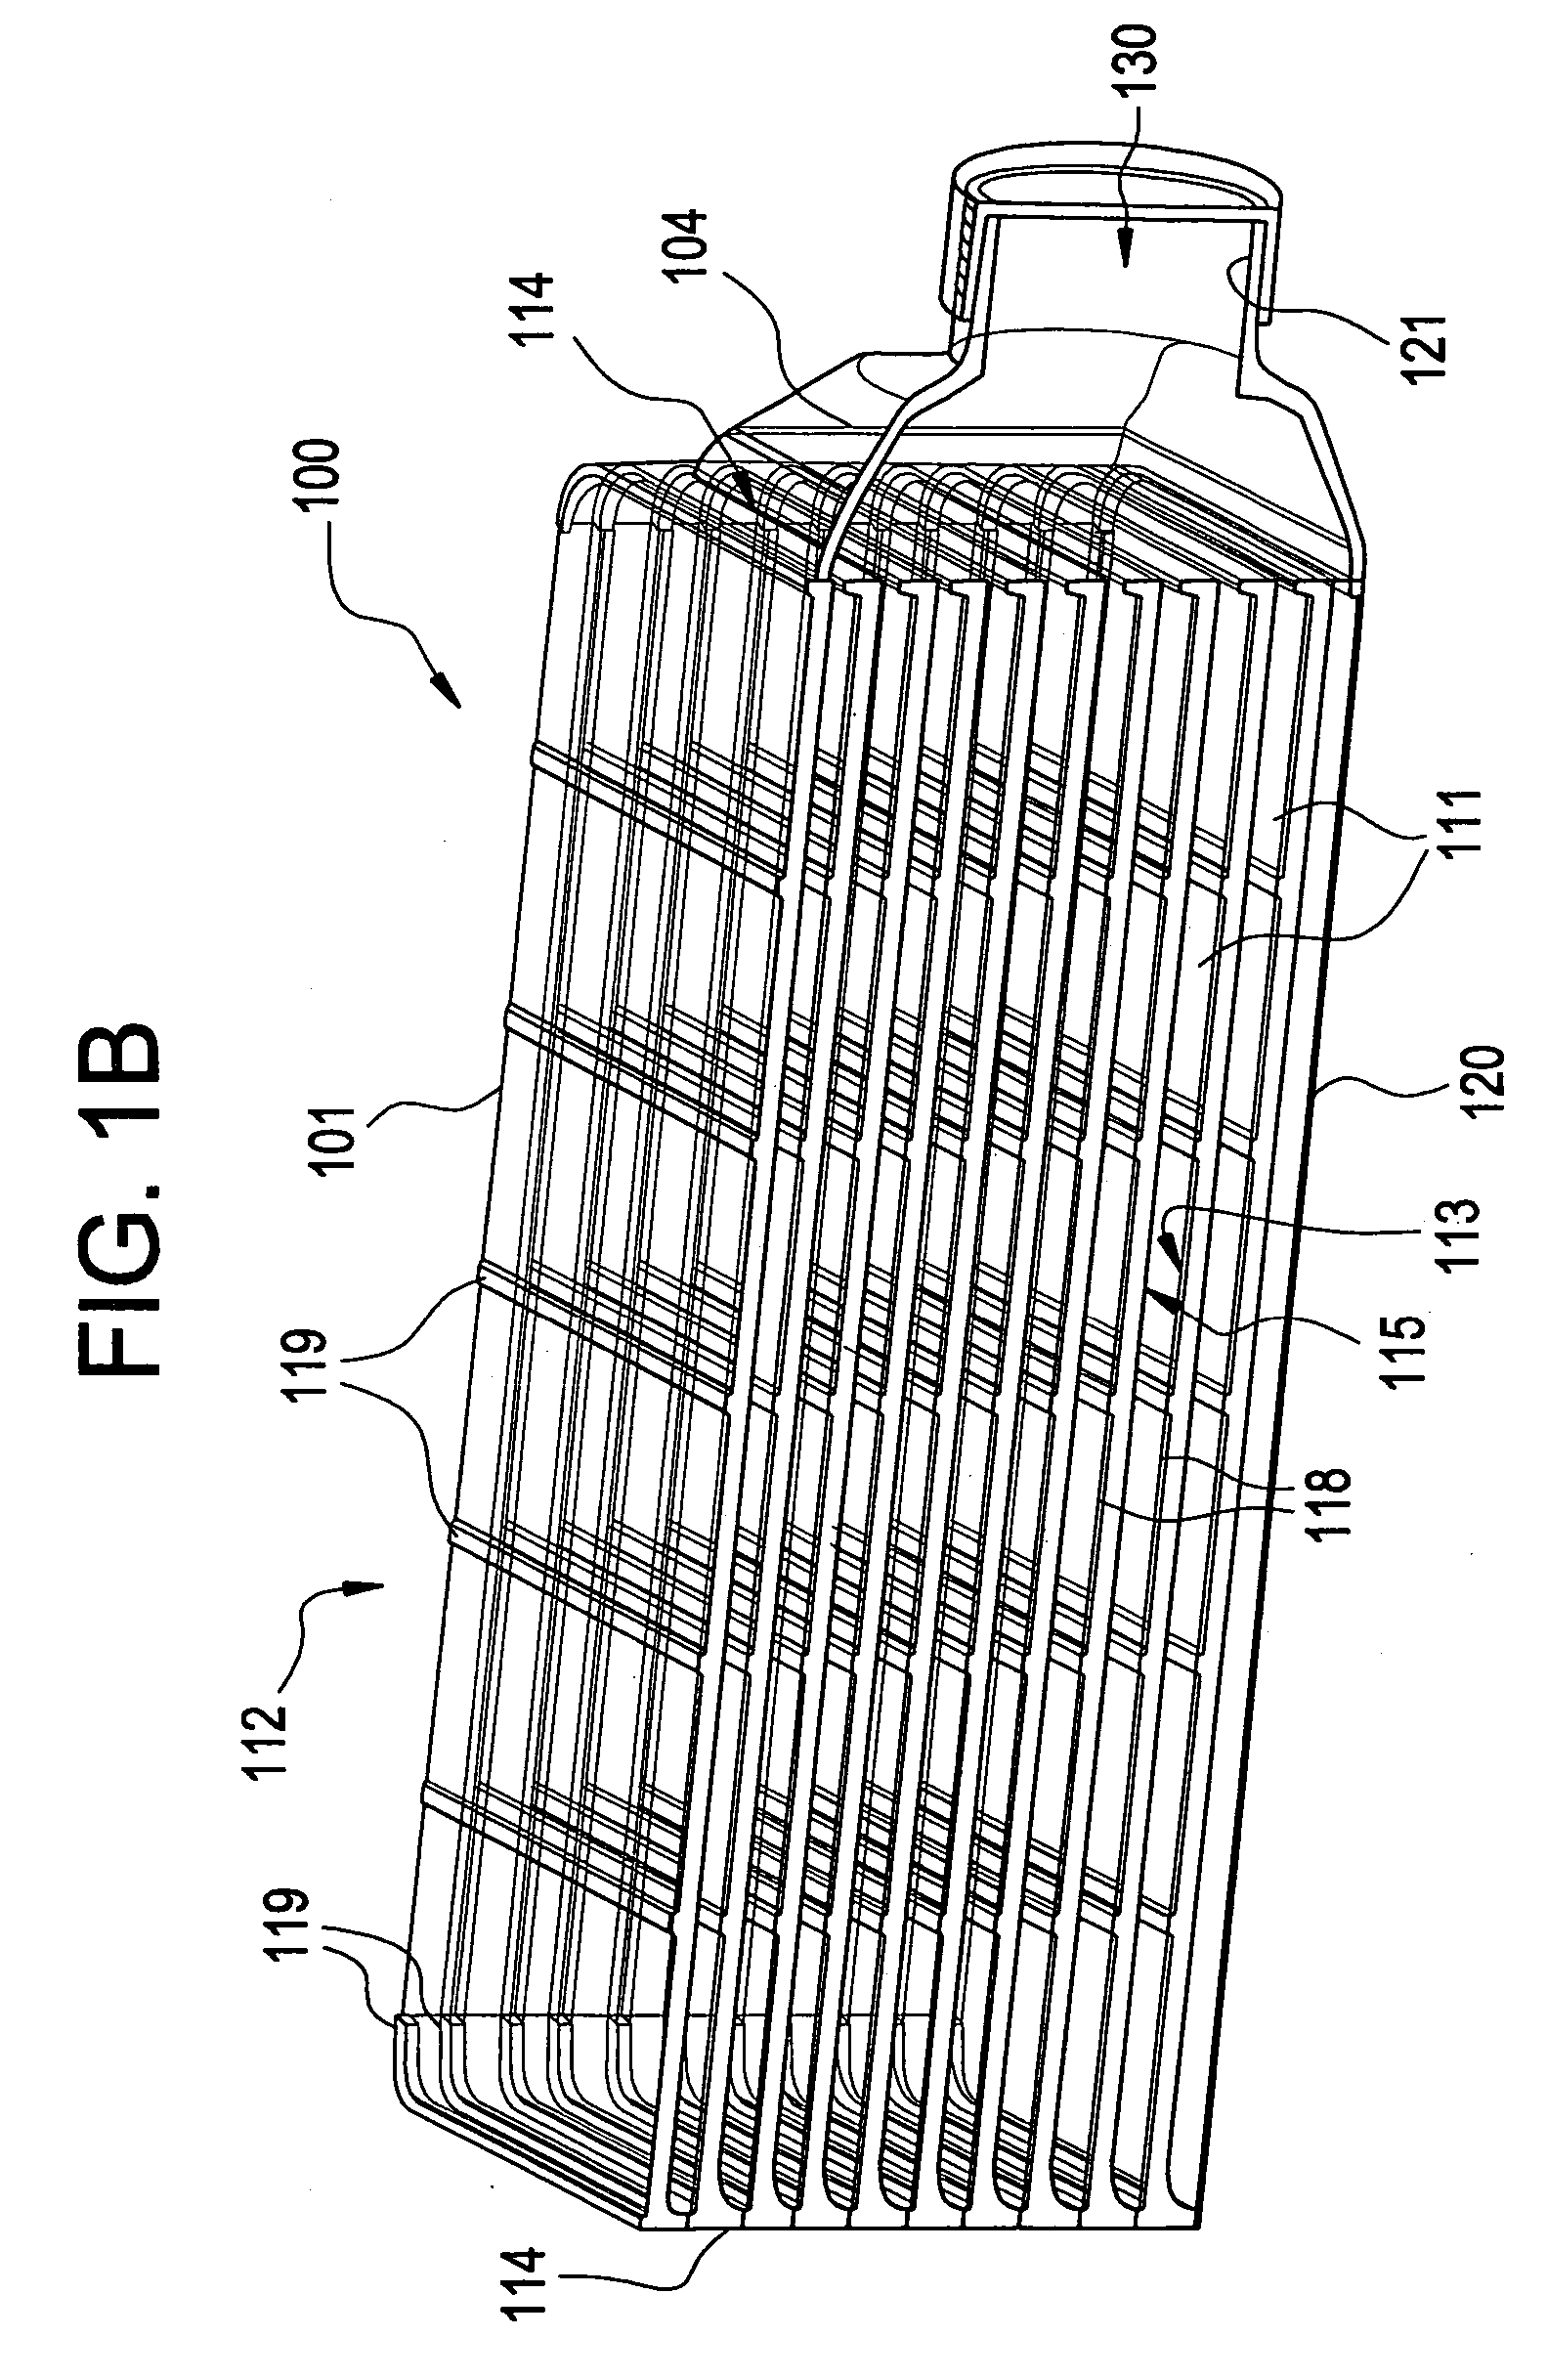 Multilayered cell culture apparatus